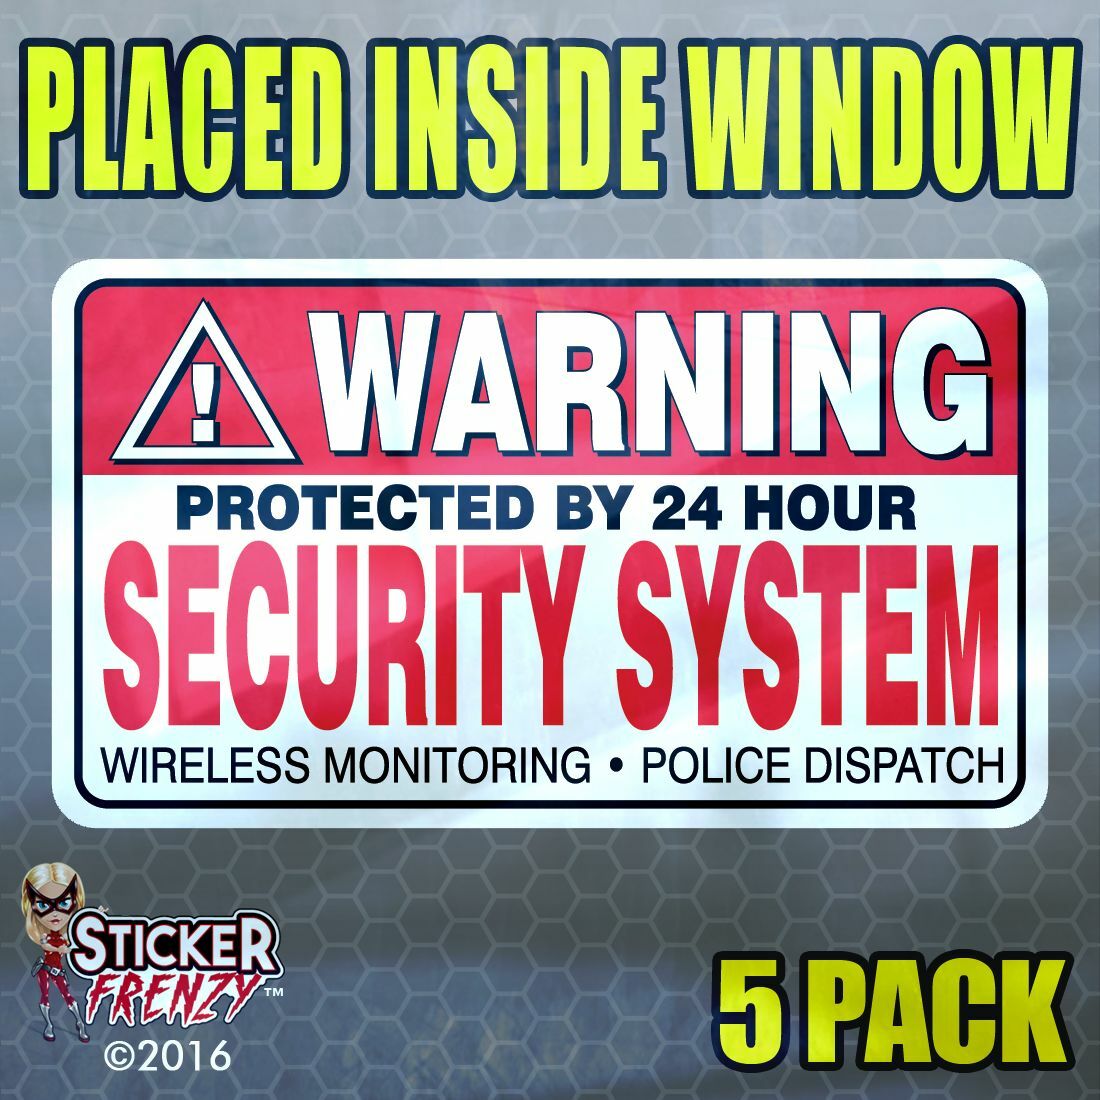 10 Pack WARNING Security System Stickers Home Alarm Decal Vinyl Window #FS031 